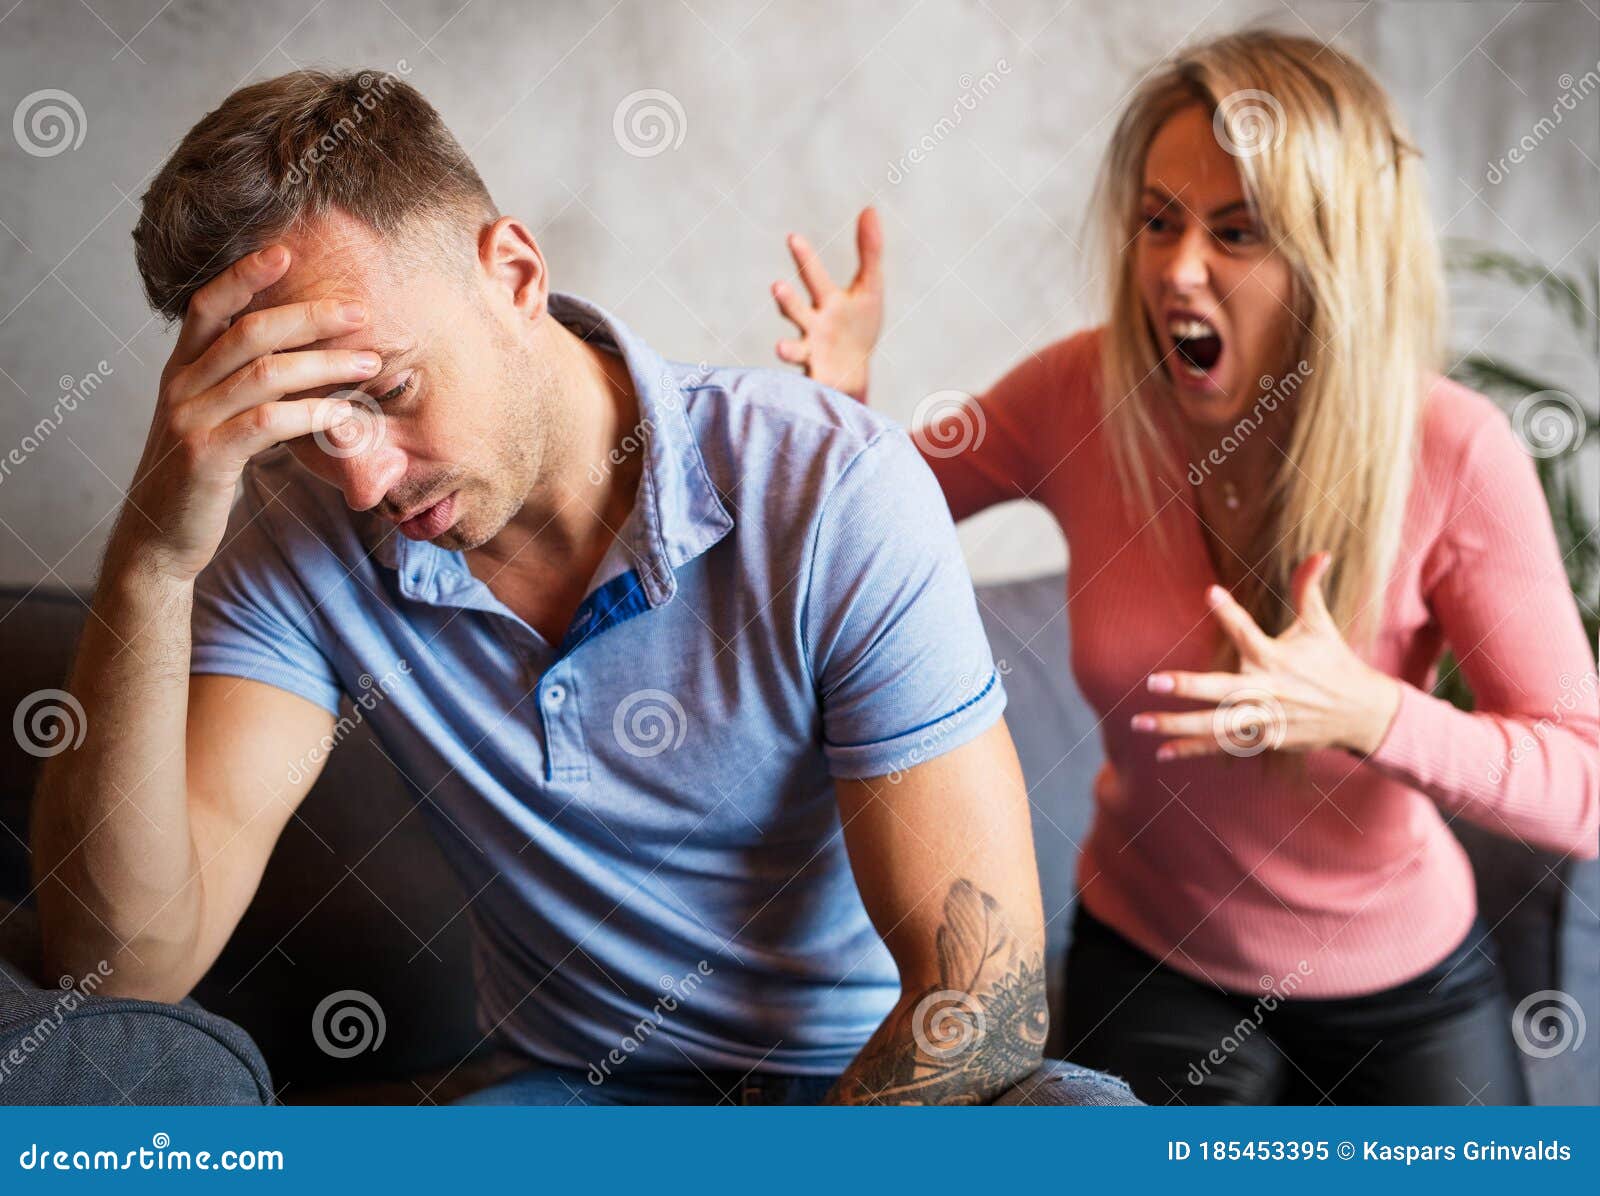 Couple Fighting, Woman Yelling at Man Stock Image - Image of breaking,  dispute: 185453395